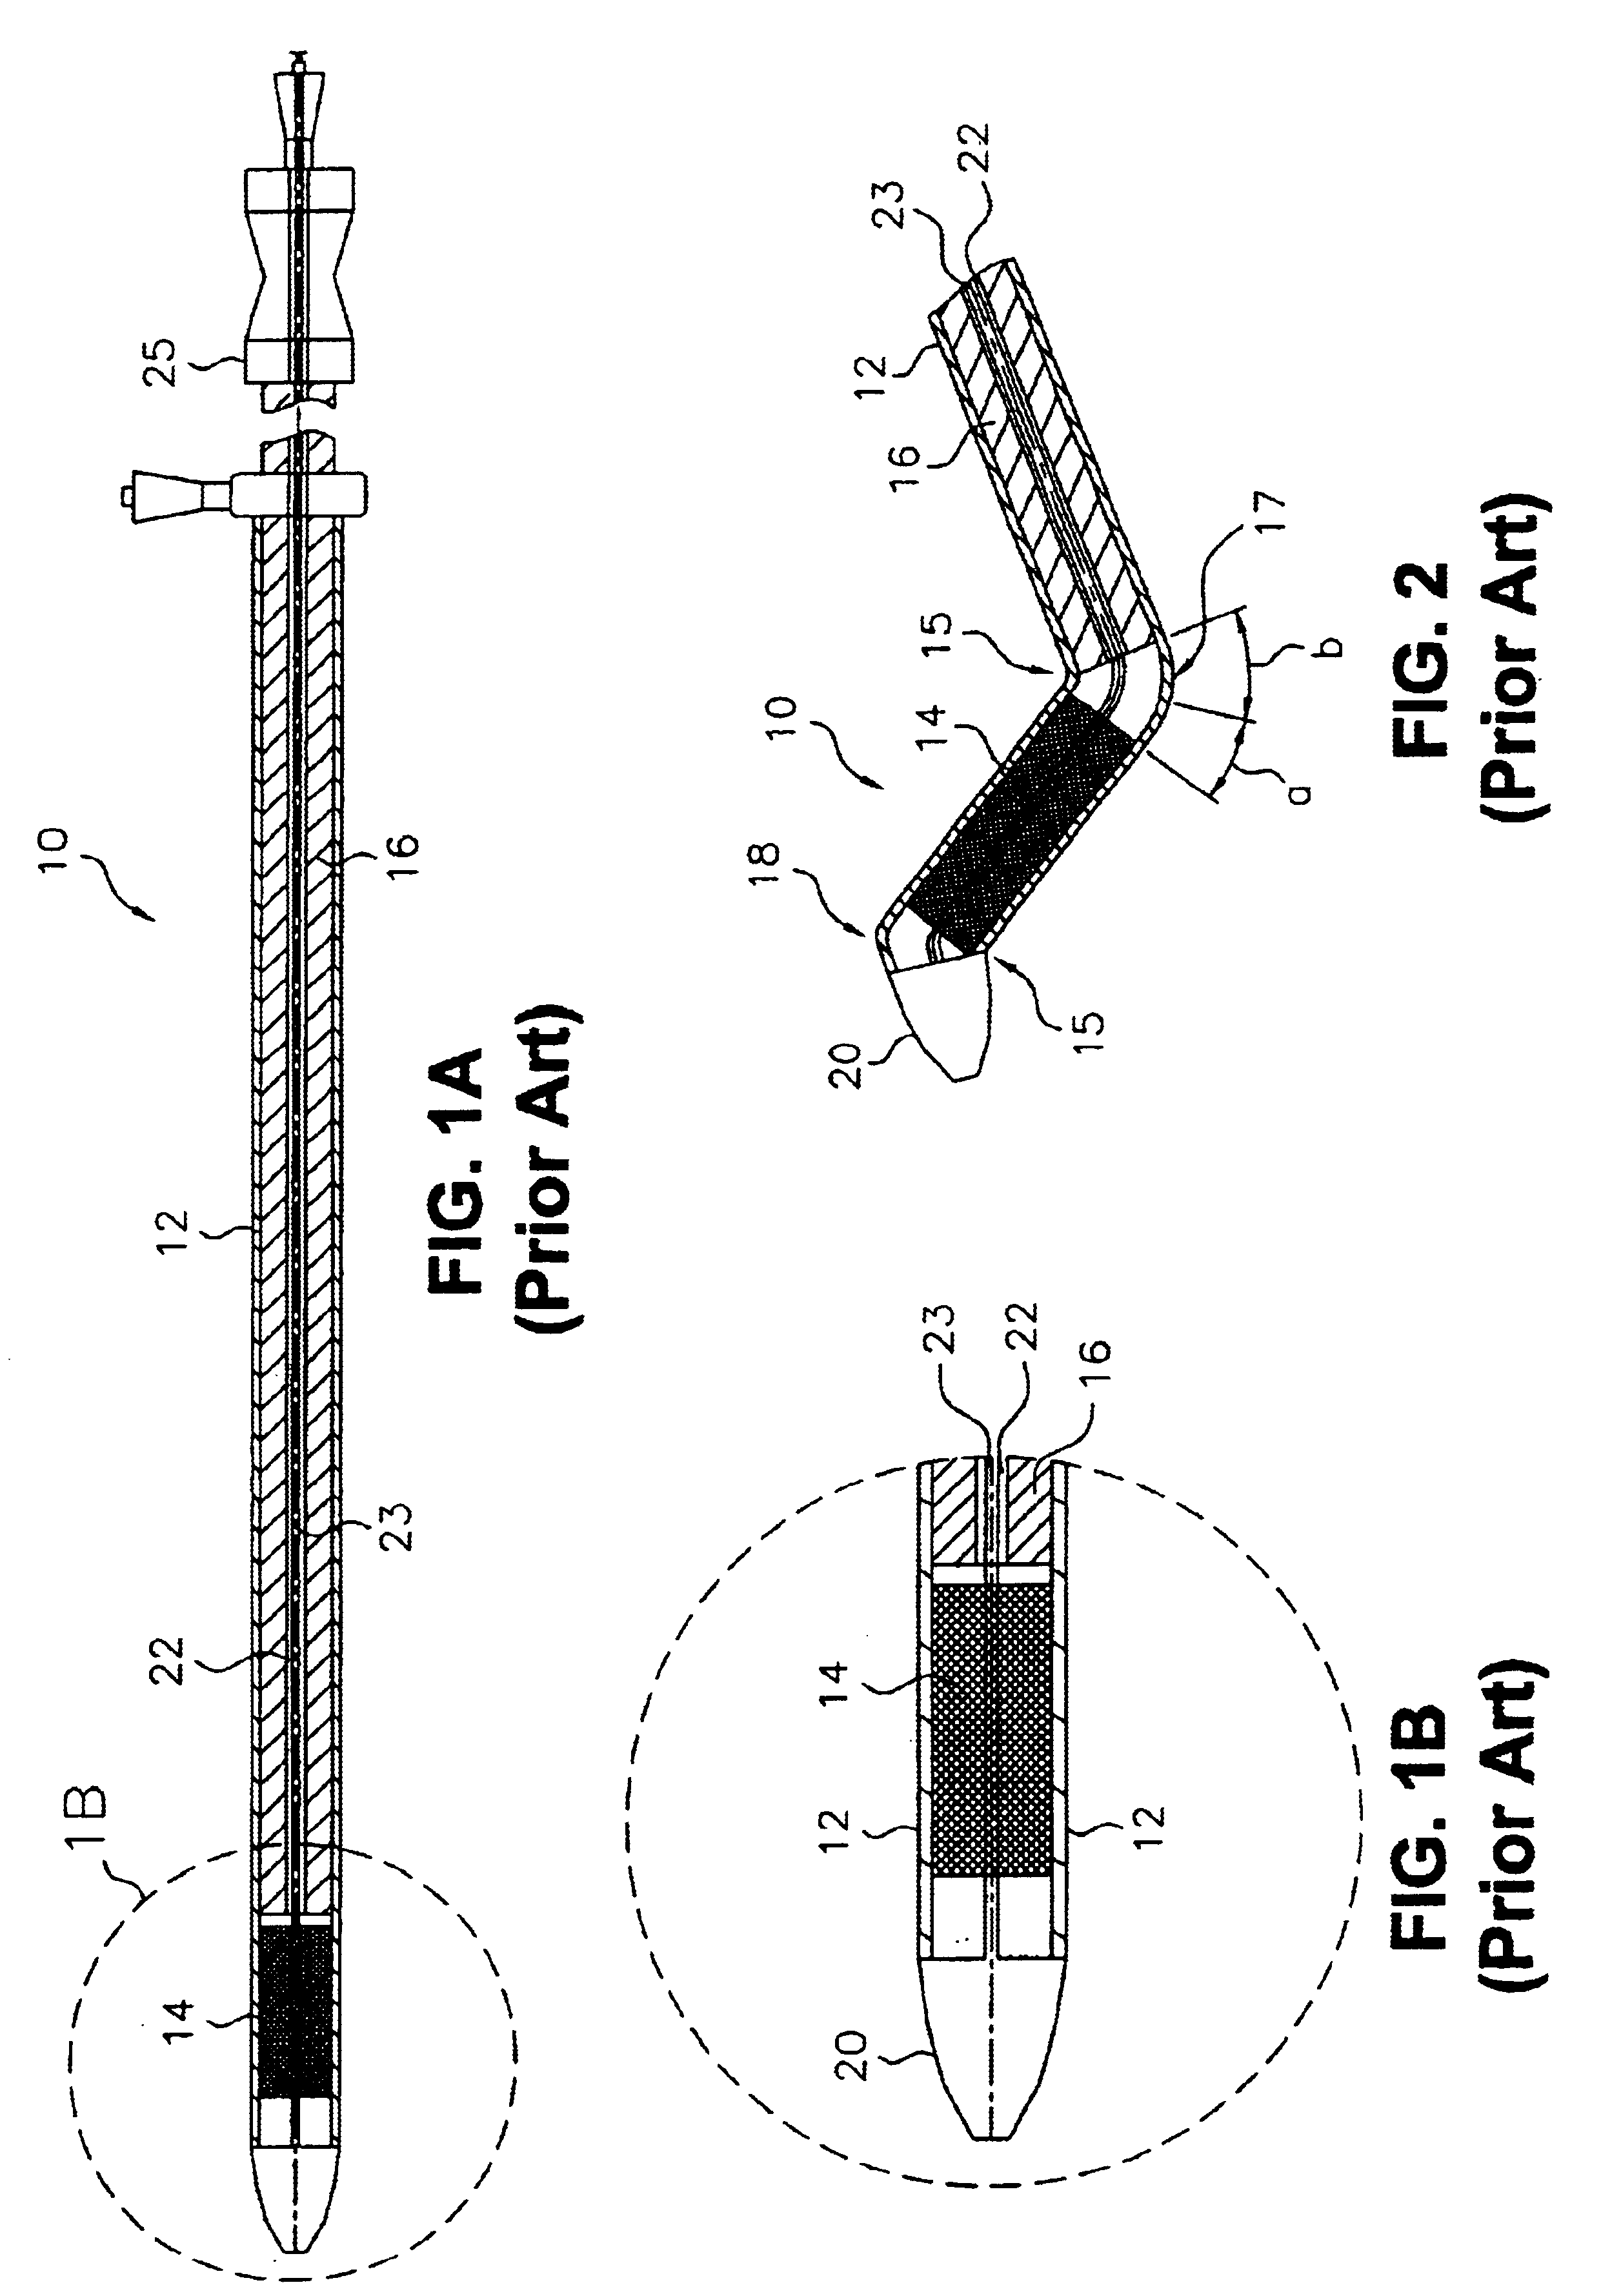 Stent delivery system for prevention of kinking, and method of loading and using same